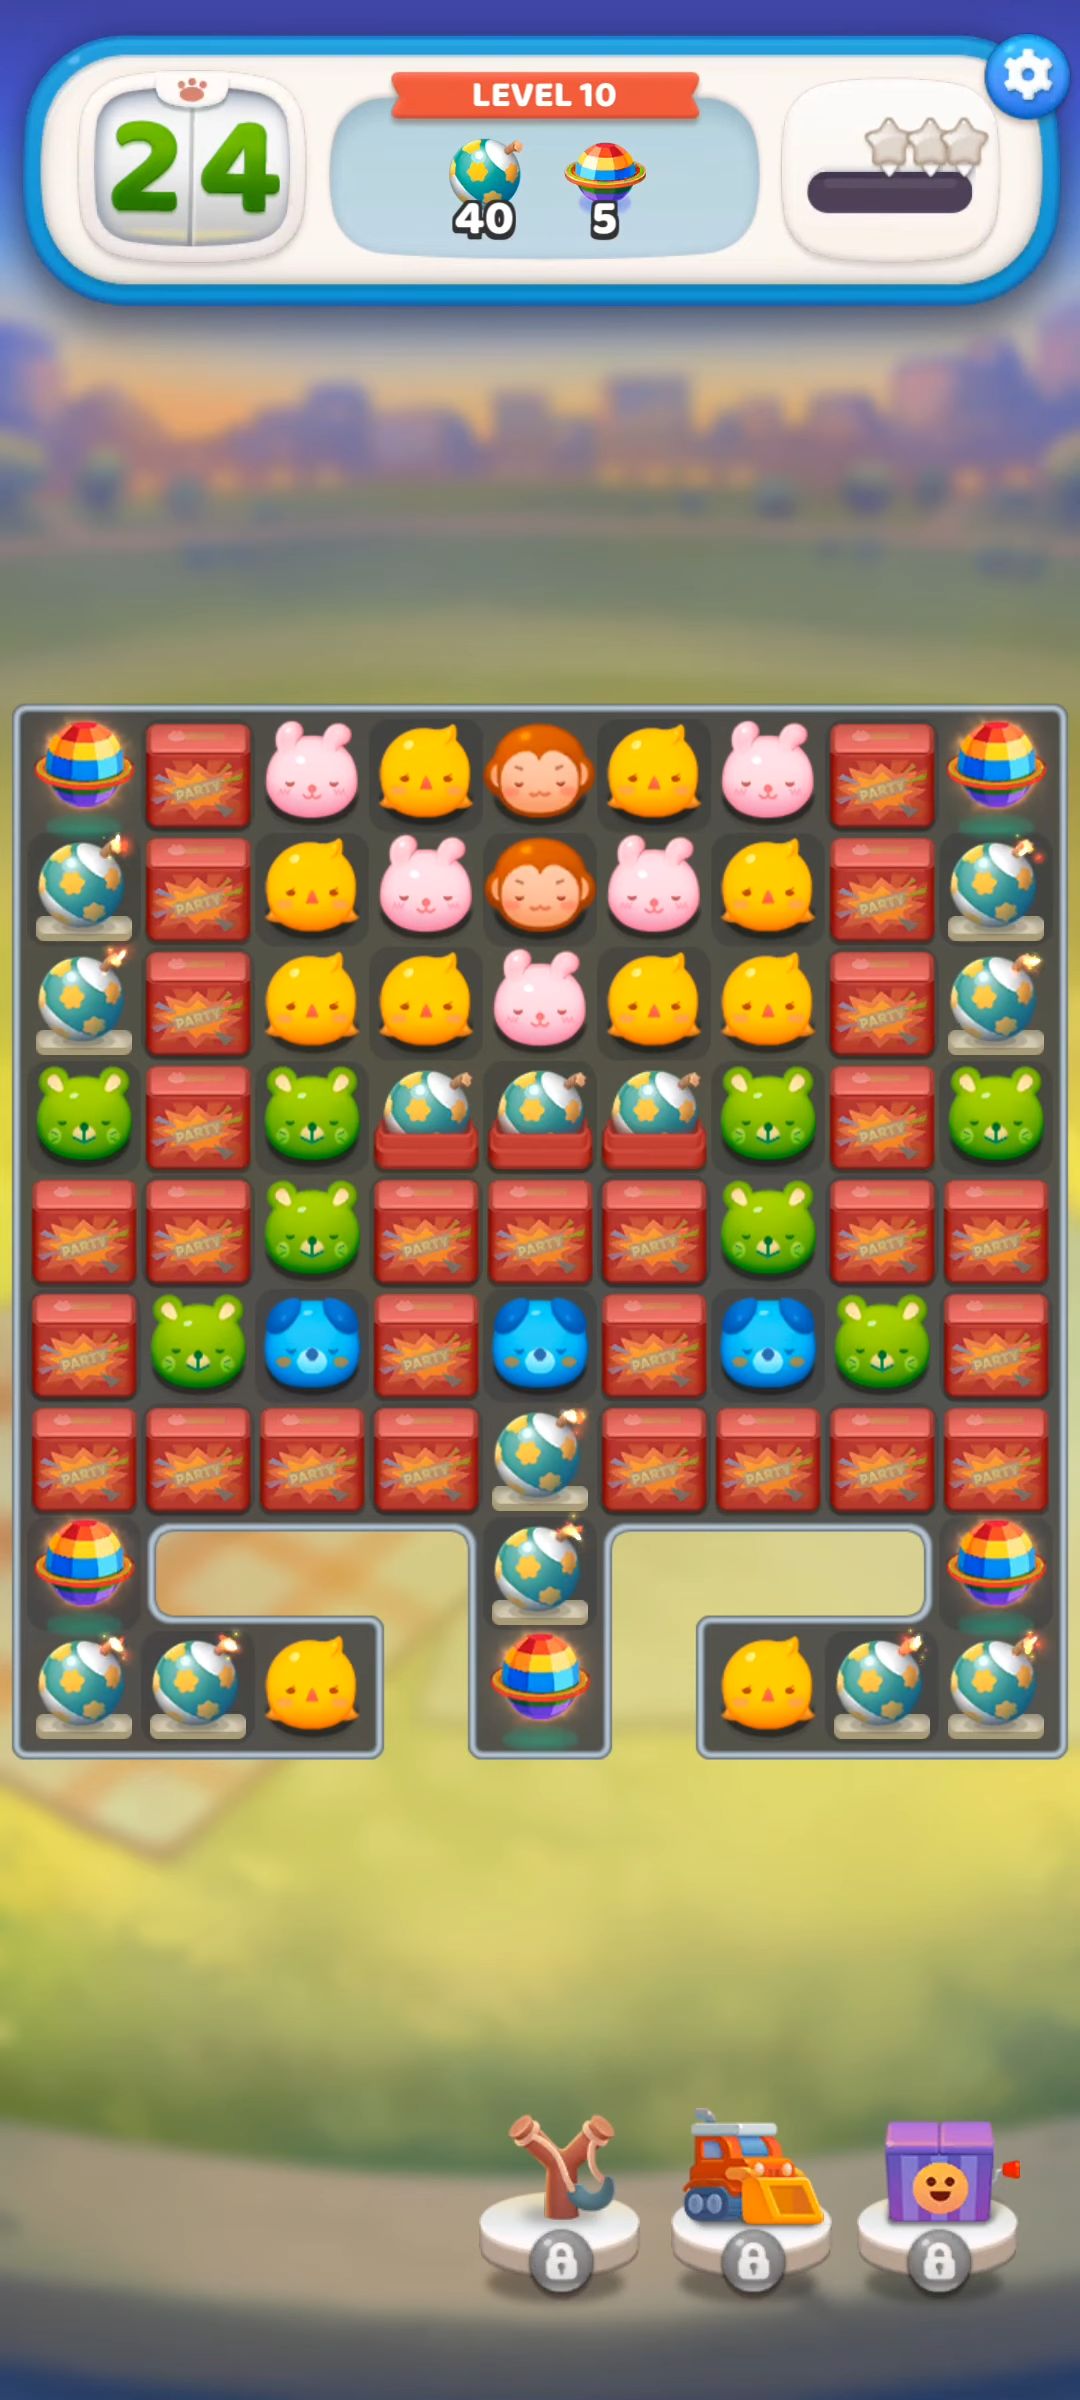 Gameplay of the Anipang Match for Android phone or tablet.